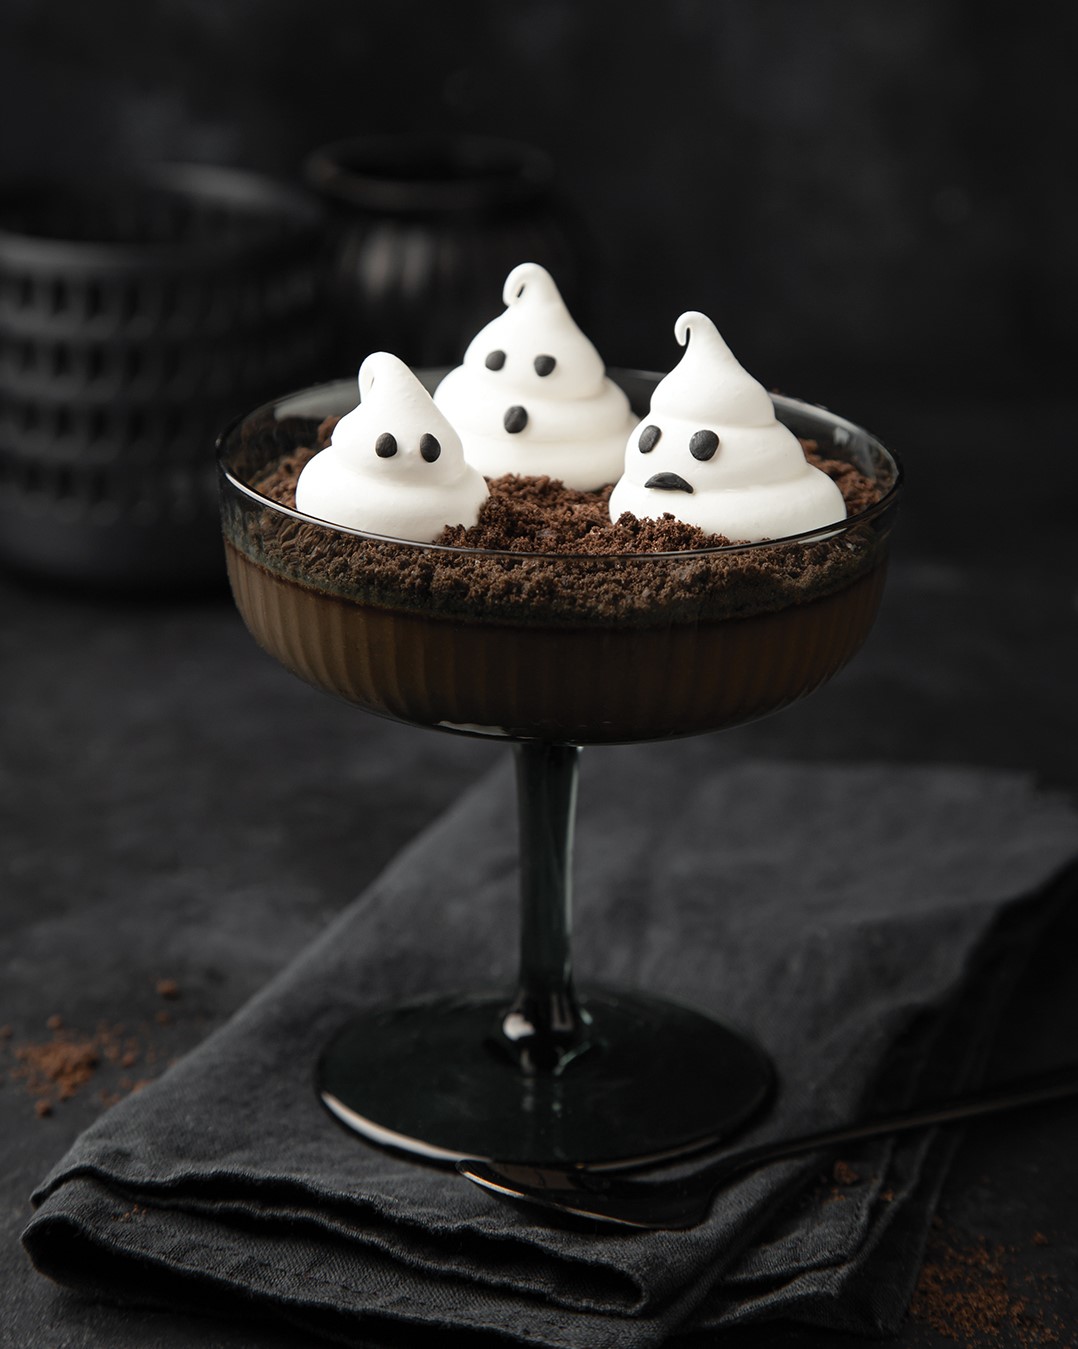 Halloween dessert idea - Cocolate Panna Cotta with chocolate cookie crumbes and meringue ghosts, black background